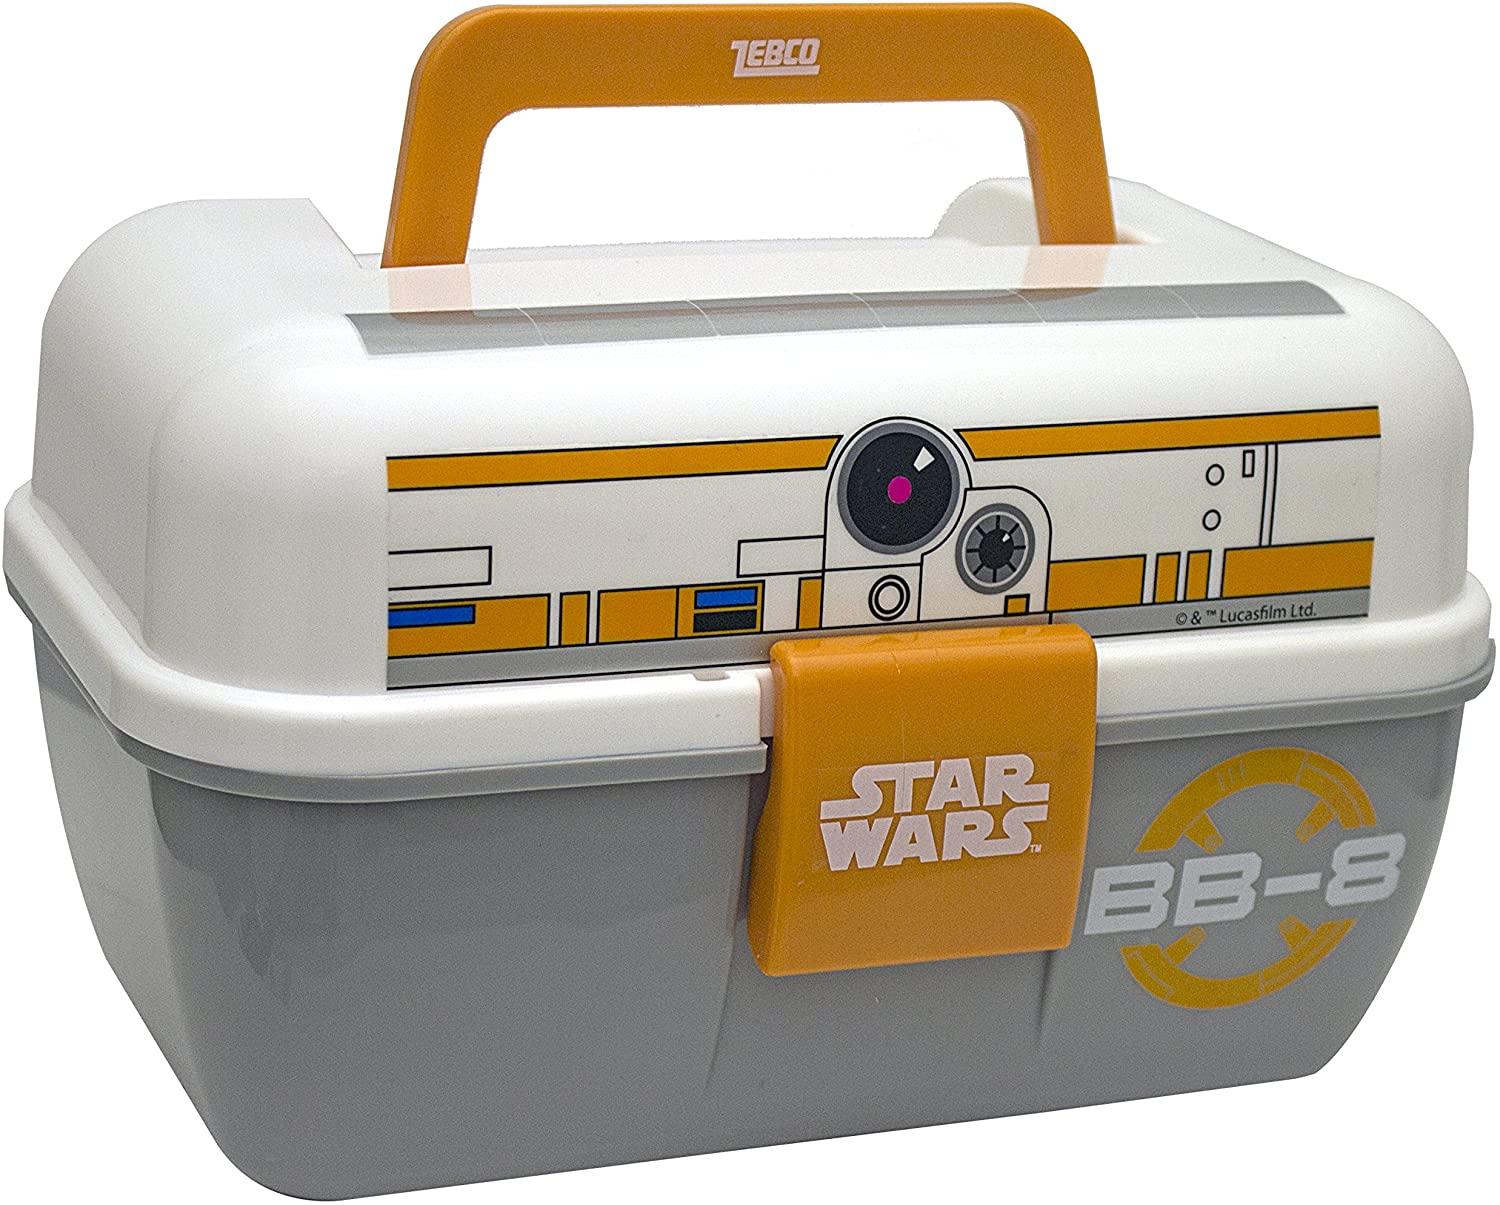 Zebco Star Wars Tackle Box for $7.99